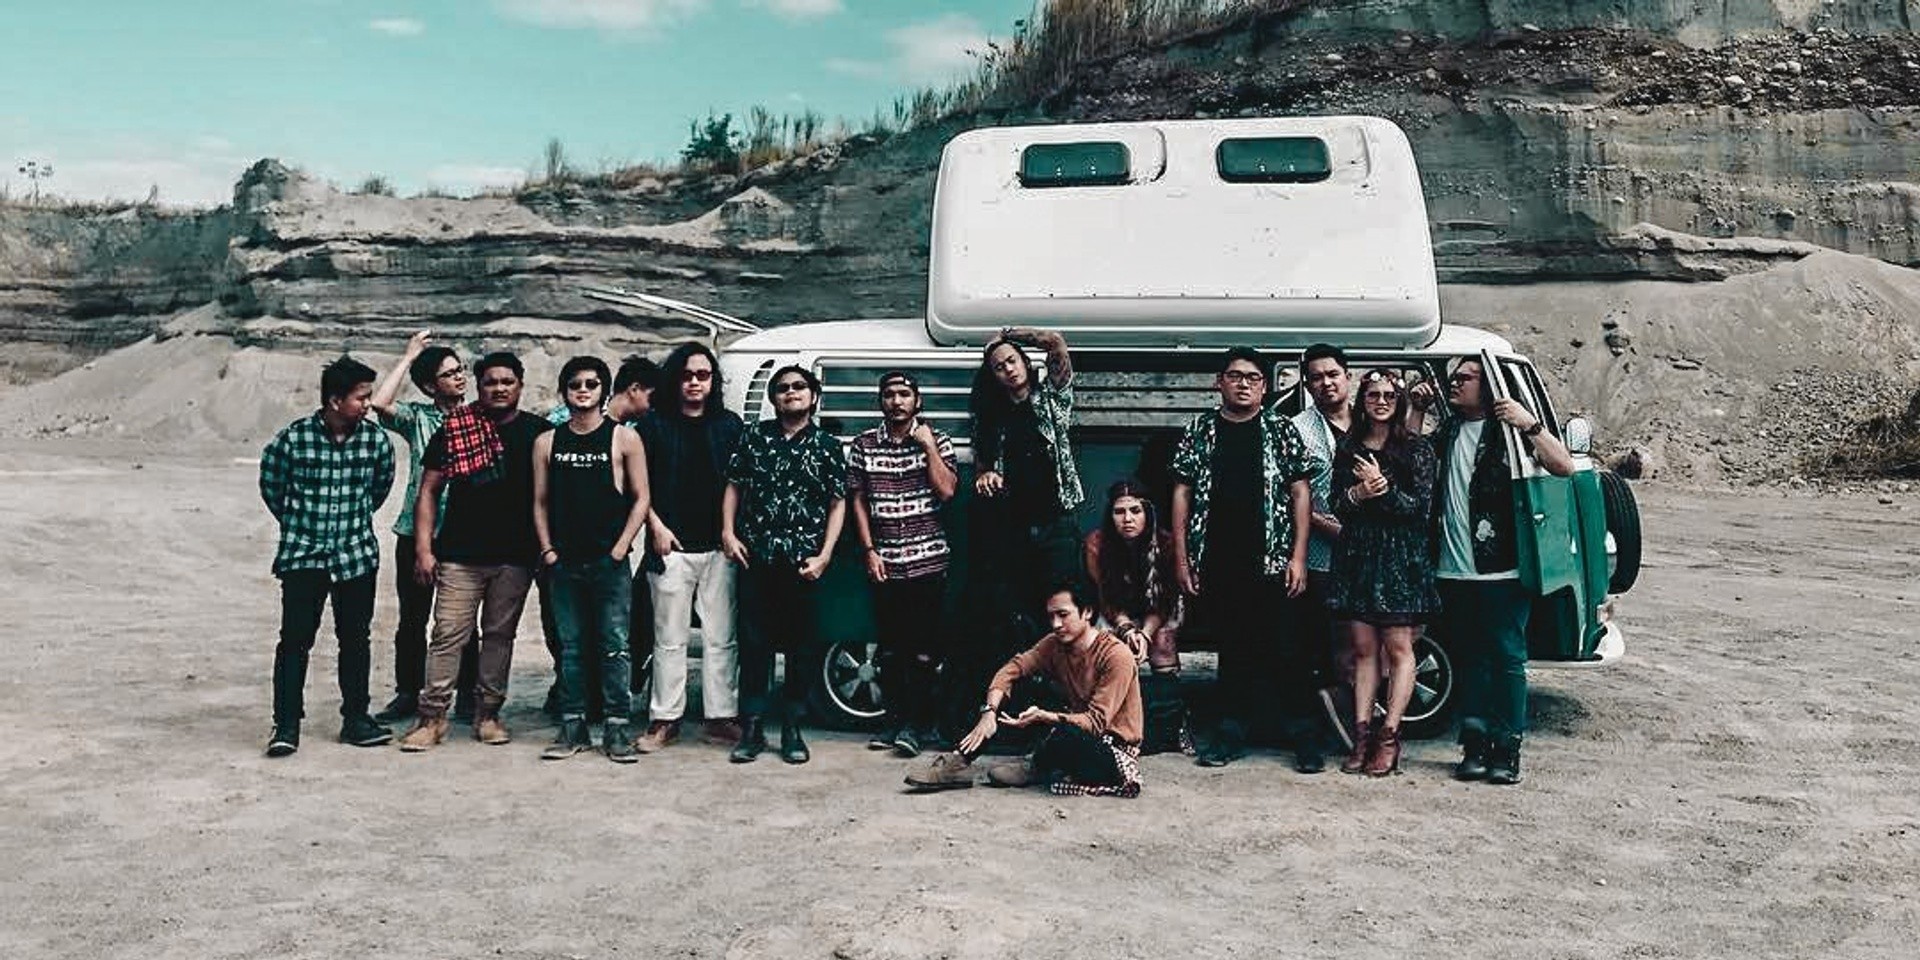 December Avenue, Autotelic, Gracenote share visual teasers from 'Summer Song' collab